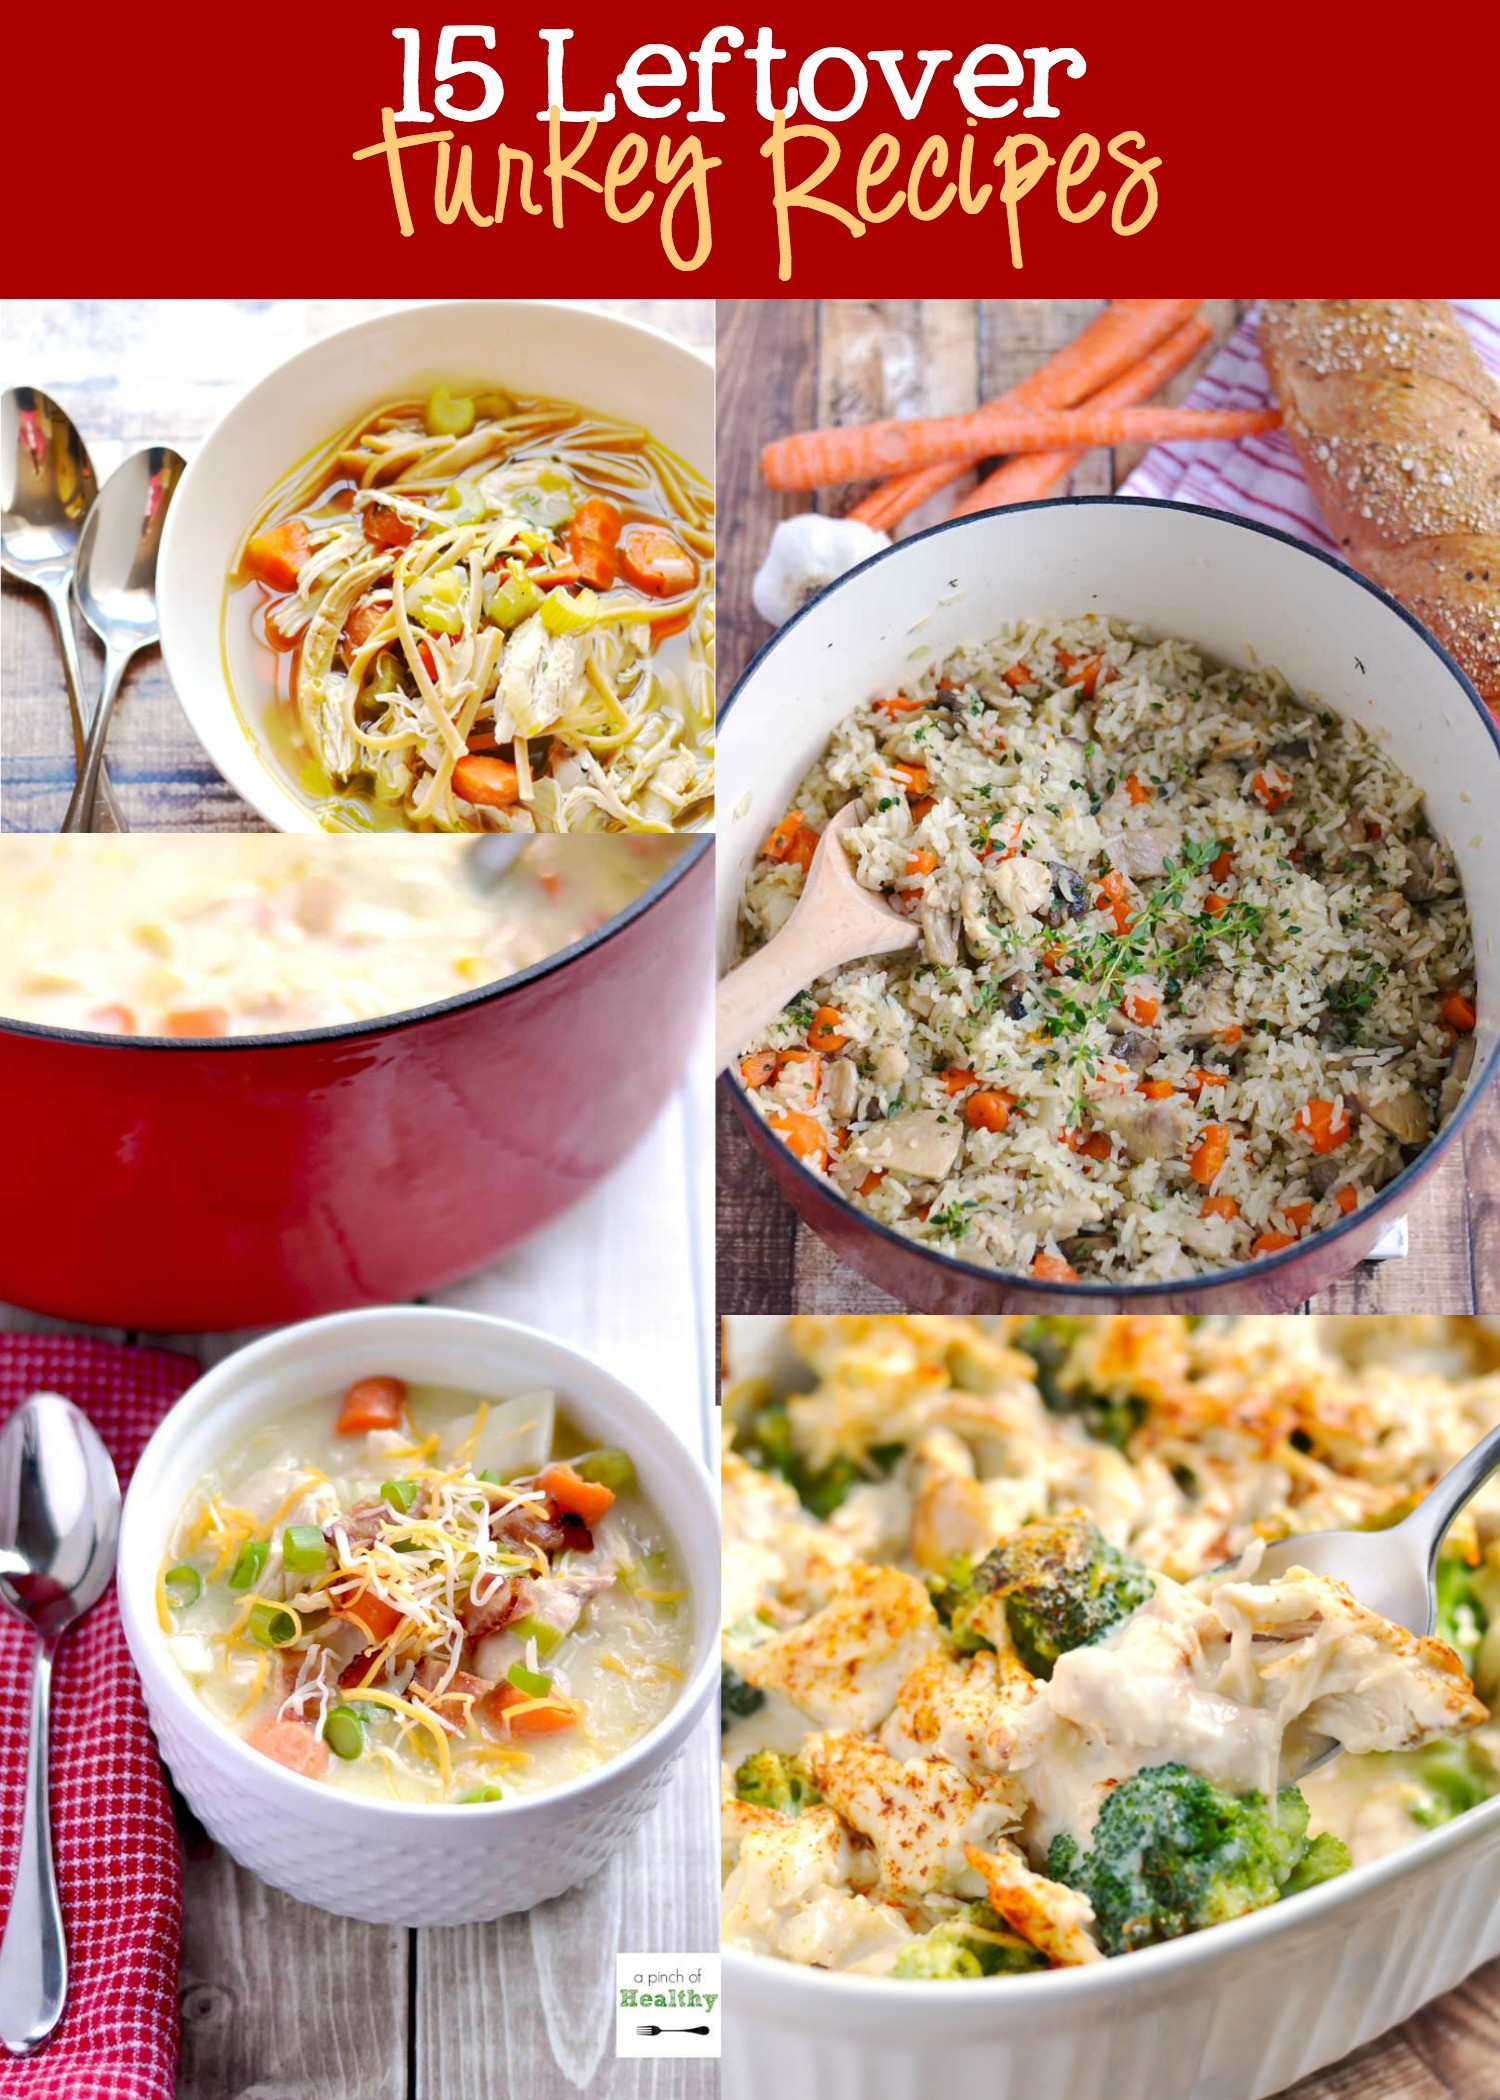 Healthy Thanksgiving Leftover Recipes
 Leftover Turkey Recipes Roundup A Pinch of Healthy